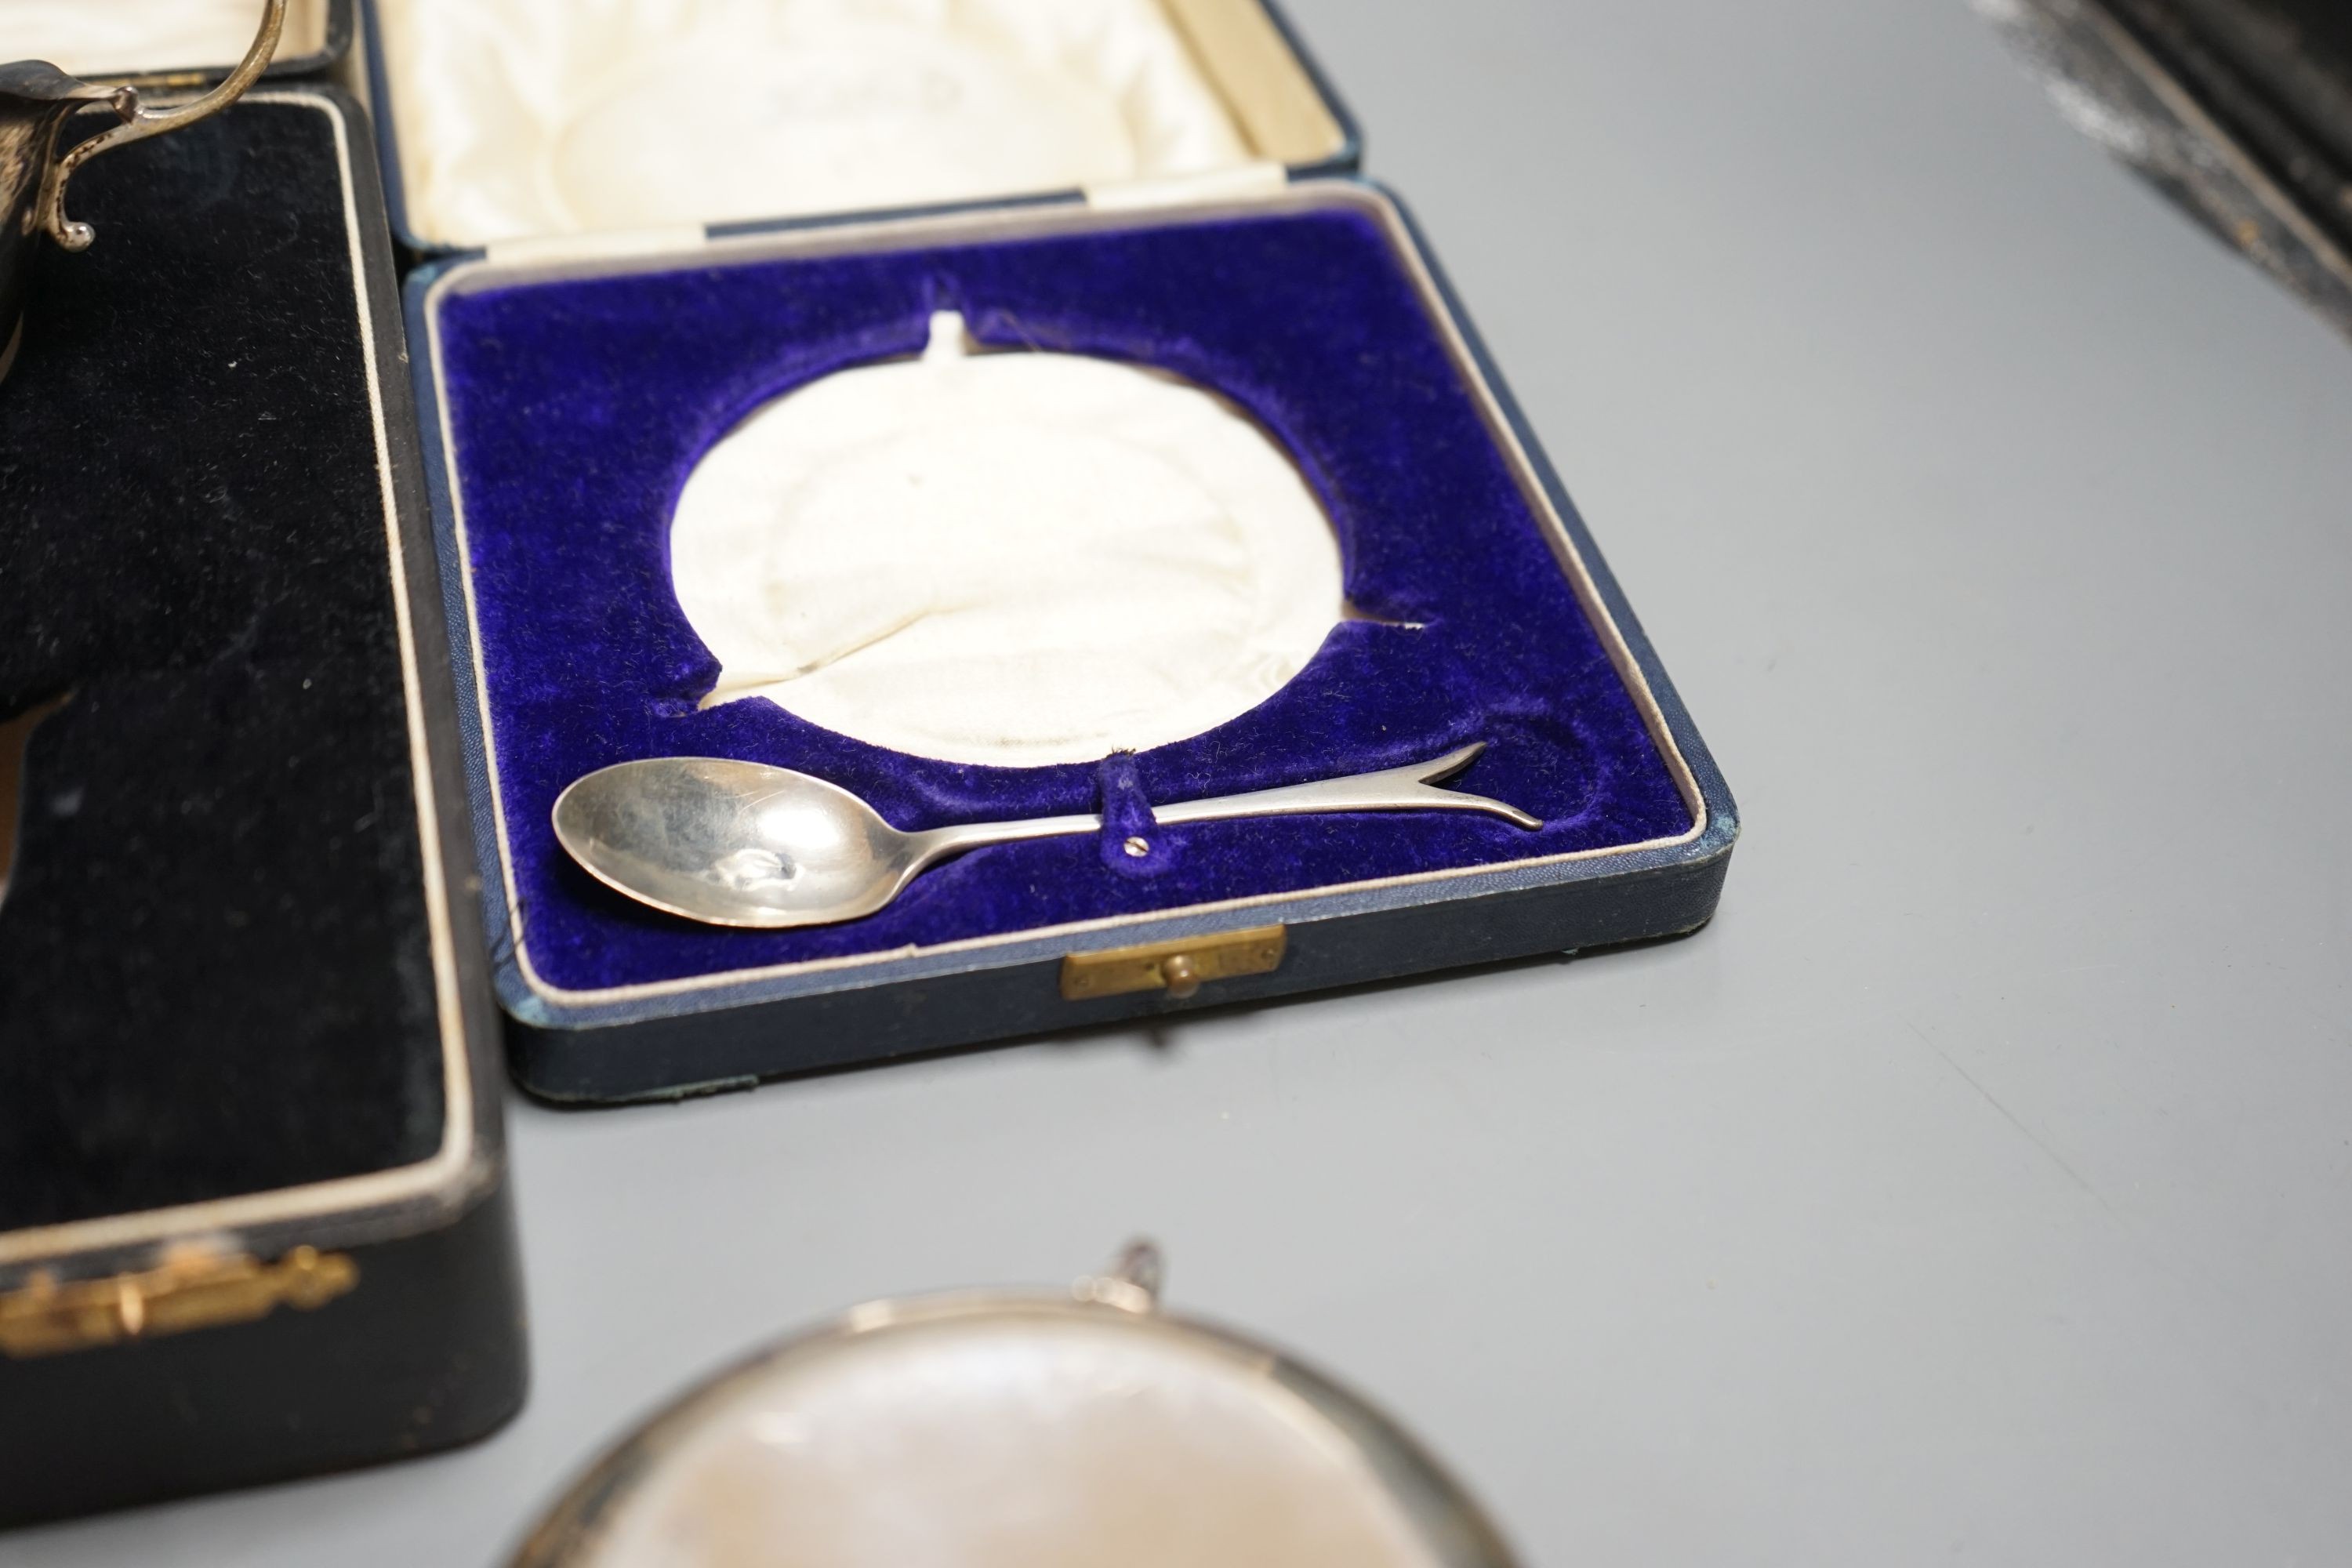 A cased George V silver three handle bowl and spoon, Birmingham, 1928 and a silver sauceboat, 7oz.